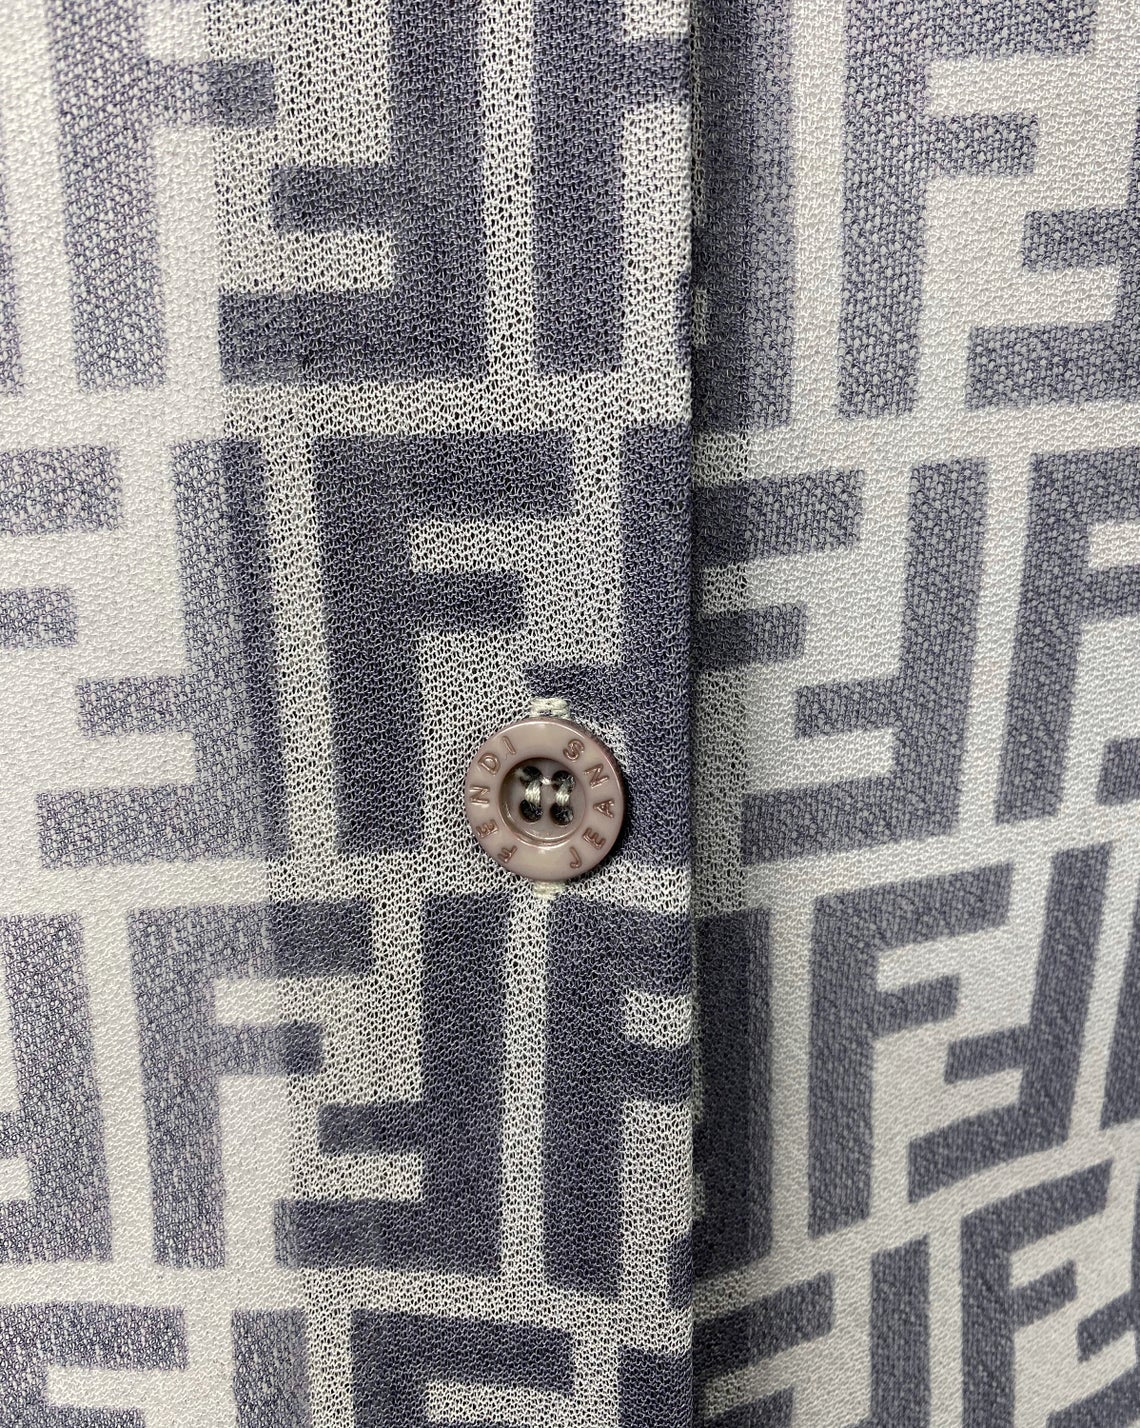 FRUIT Vintage Fendi Zucca print button up shirt dating to the early 90s. This amazing piece is made from a sheer mesh and features a bold Fendi Zucca print in two tone grey.